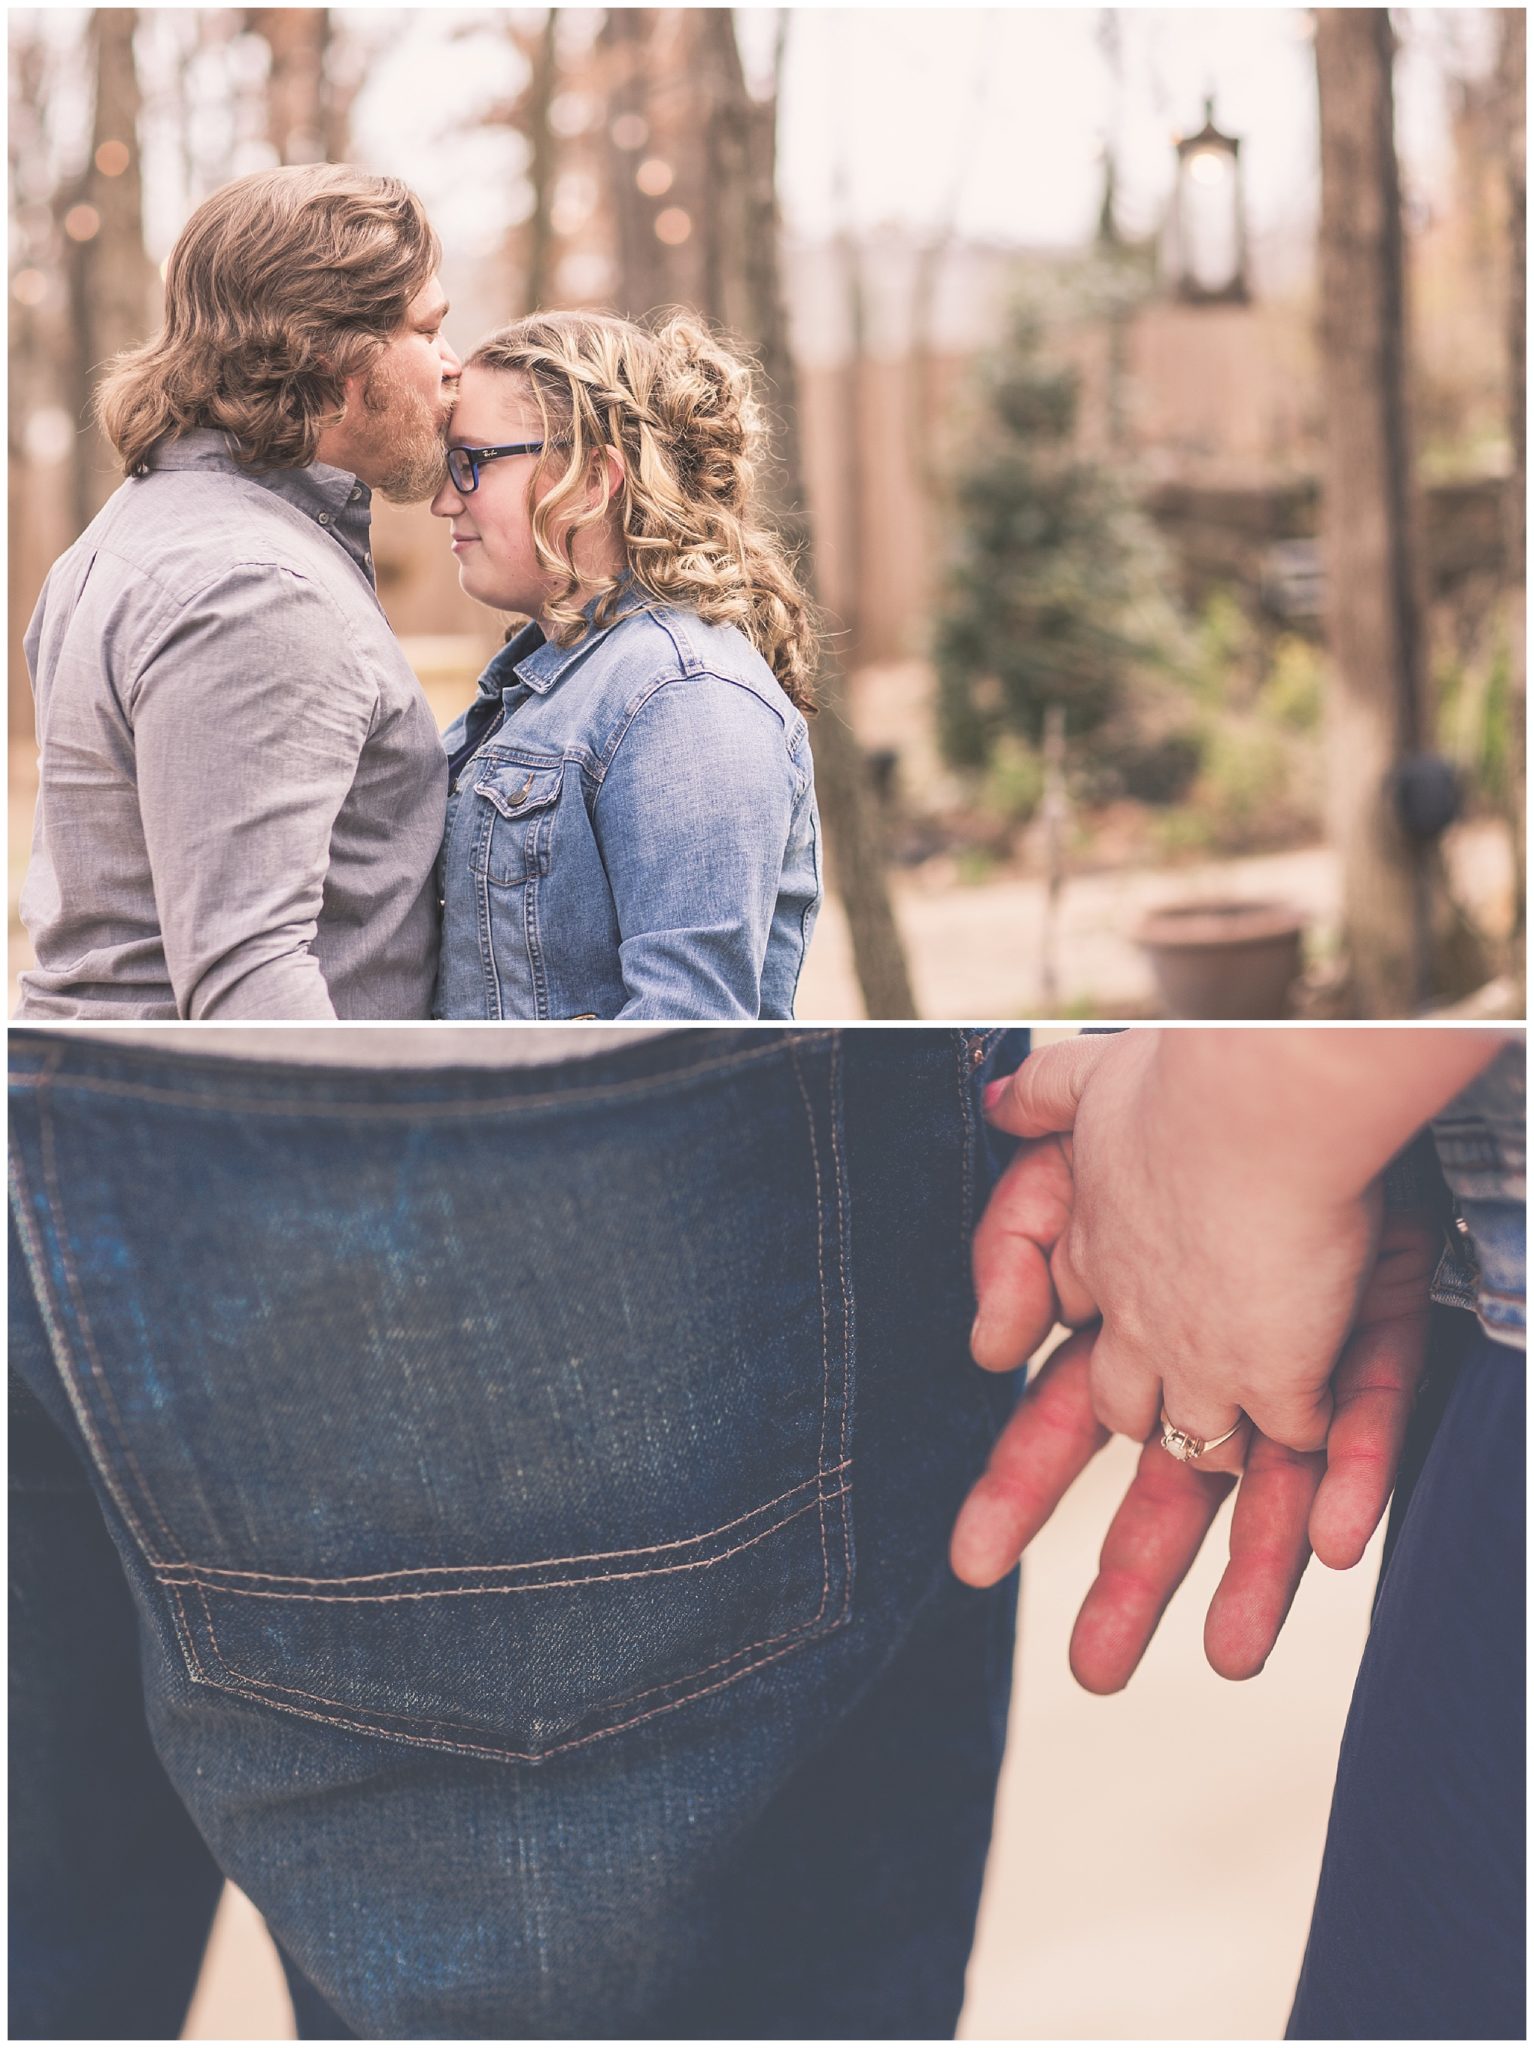 Lauren and Caleb's engagement session